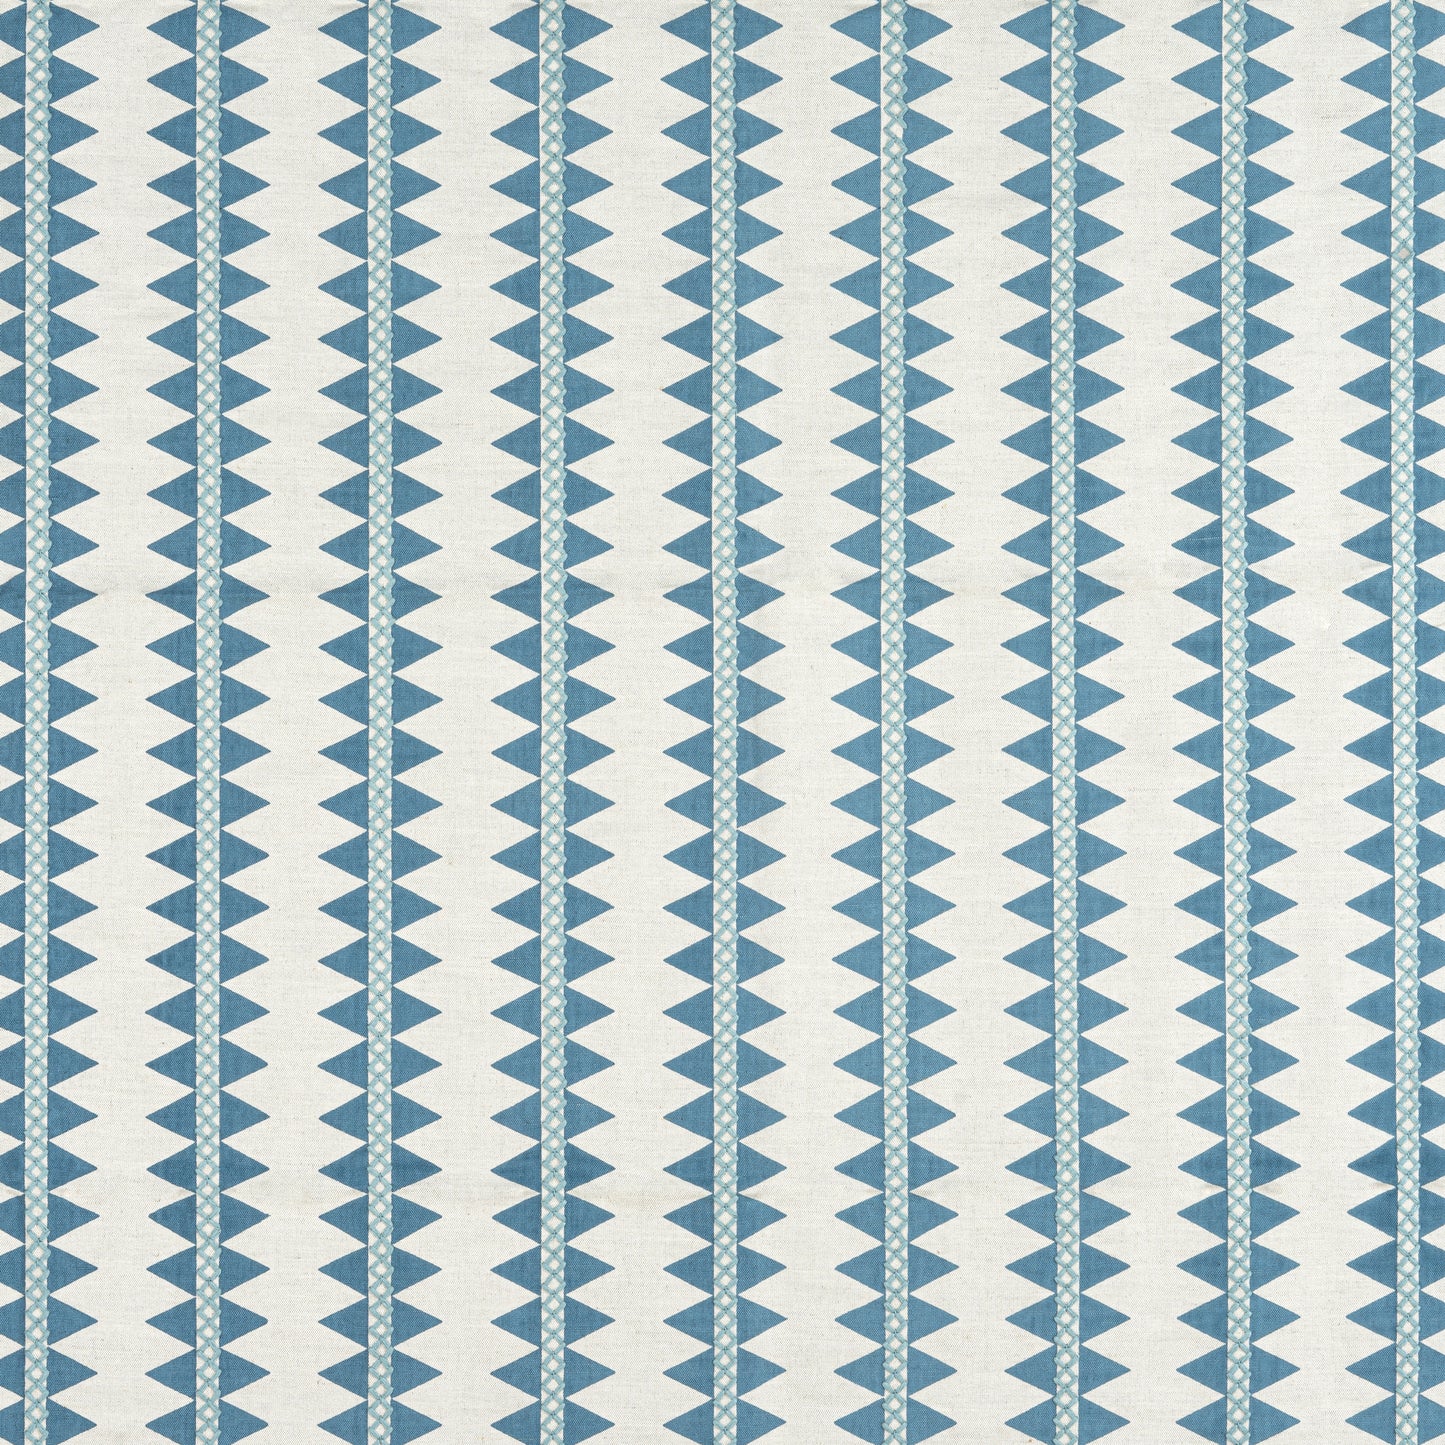 Purchase Thibaut Fabric SKU# W713243 pattern name Reno Stripe Embroidery color Teal